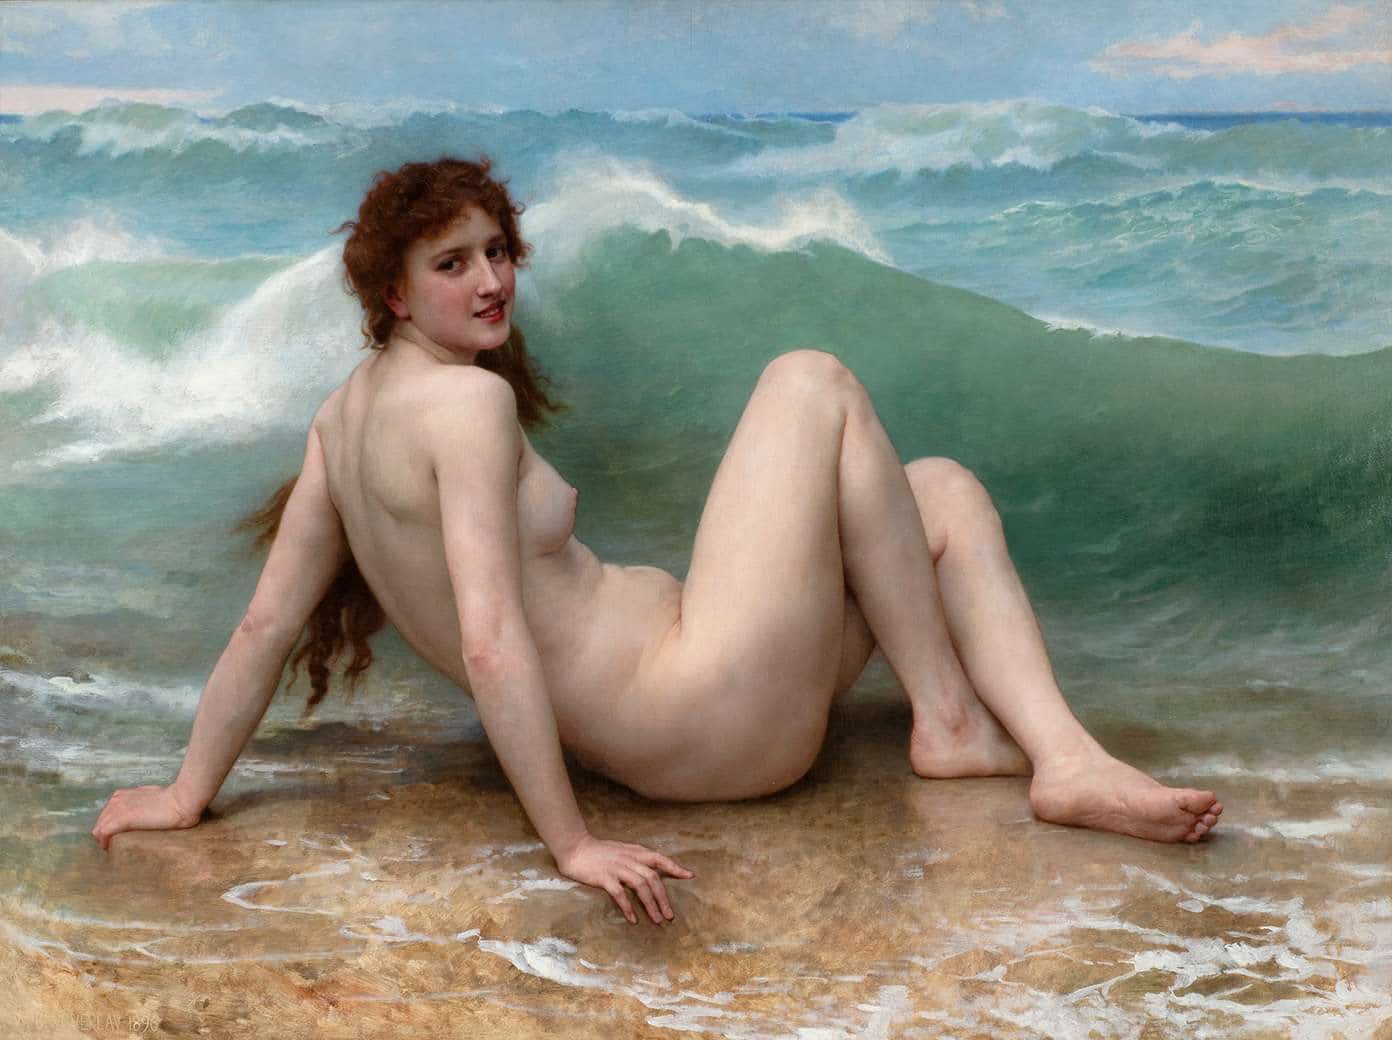 Image of nude female represented at an exhibition 'Bathers'